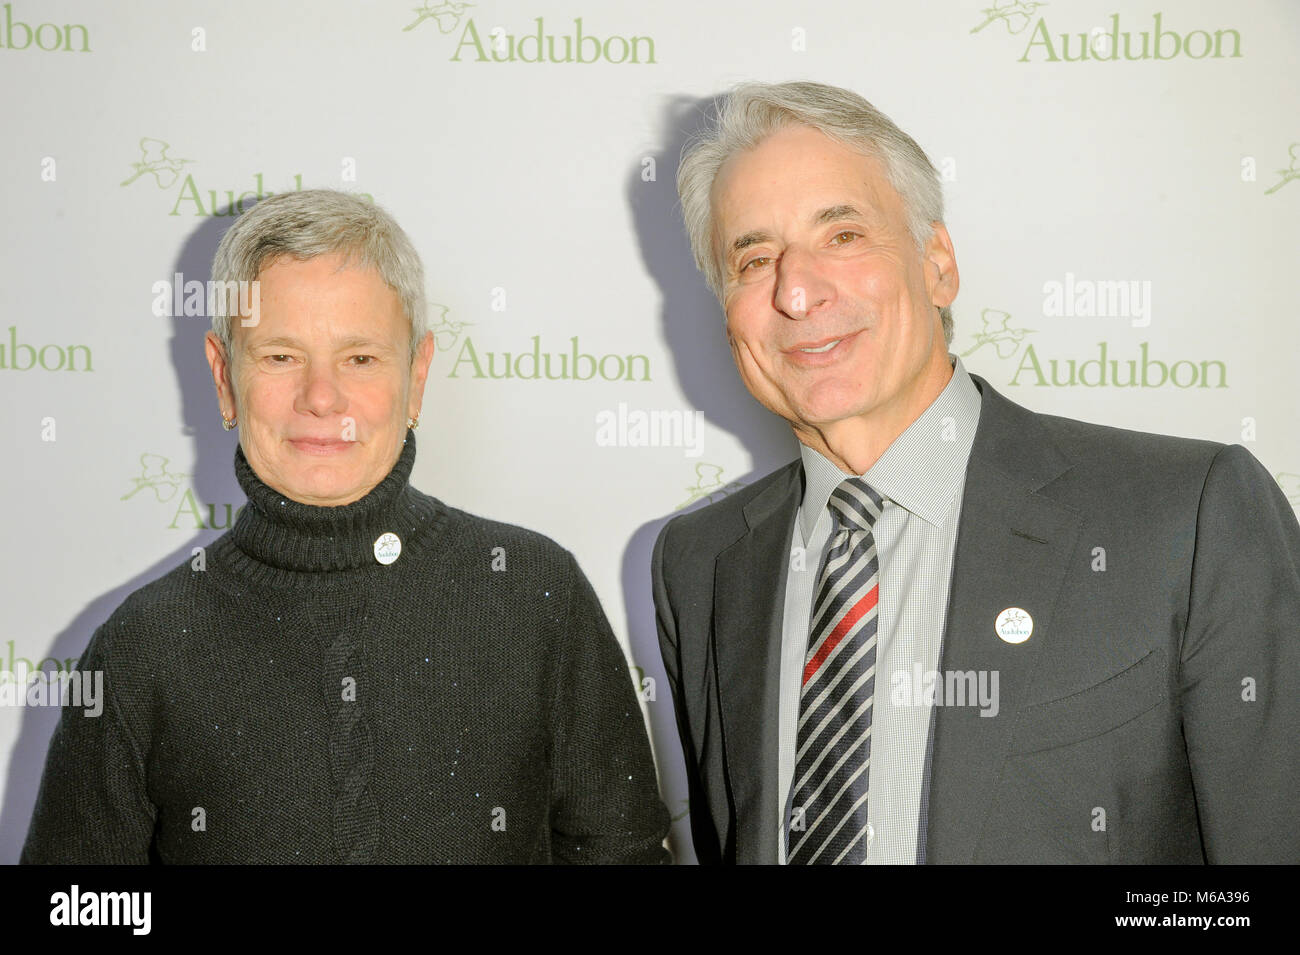 New York, USA. 1st March, 2018. Margaret Walker and David Yarnold attend the National Audubon Society Annual Gala at The Rainbow Room at 30 Rockefeller Plaza on March 1, 2018 in New York City. Credit: Ron Adar/Alamy Live News Stock Photo